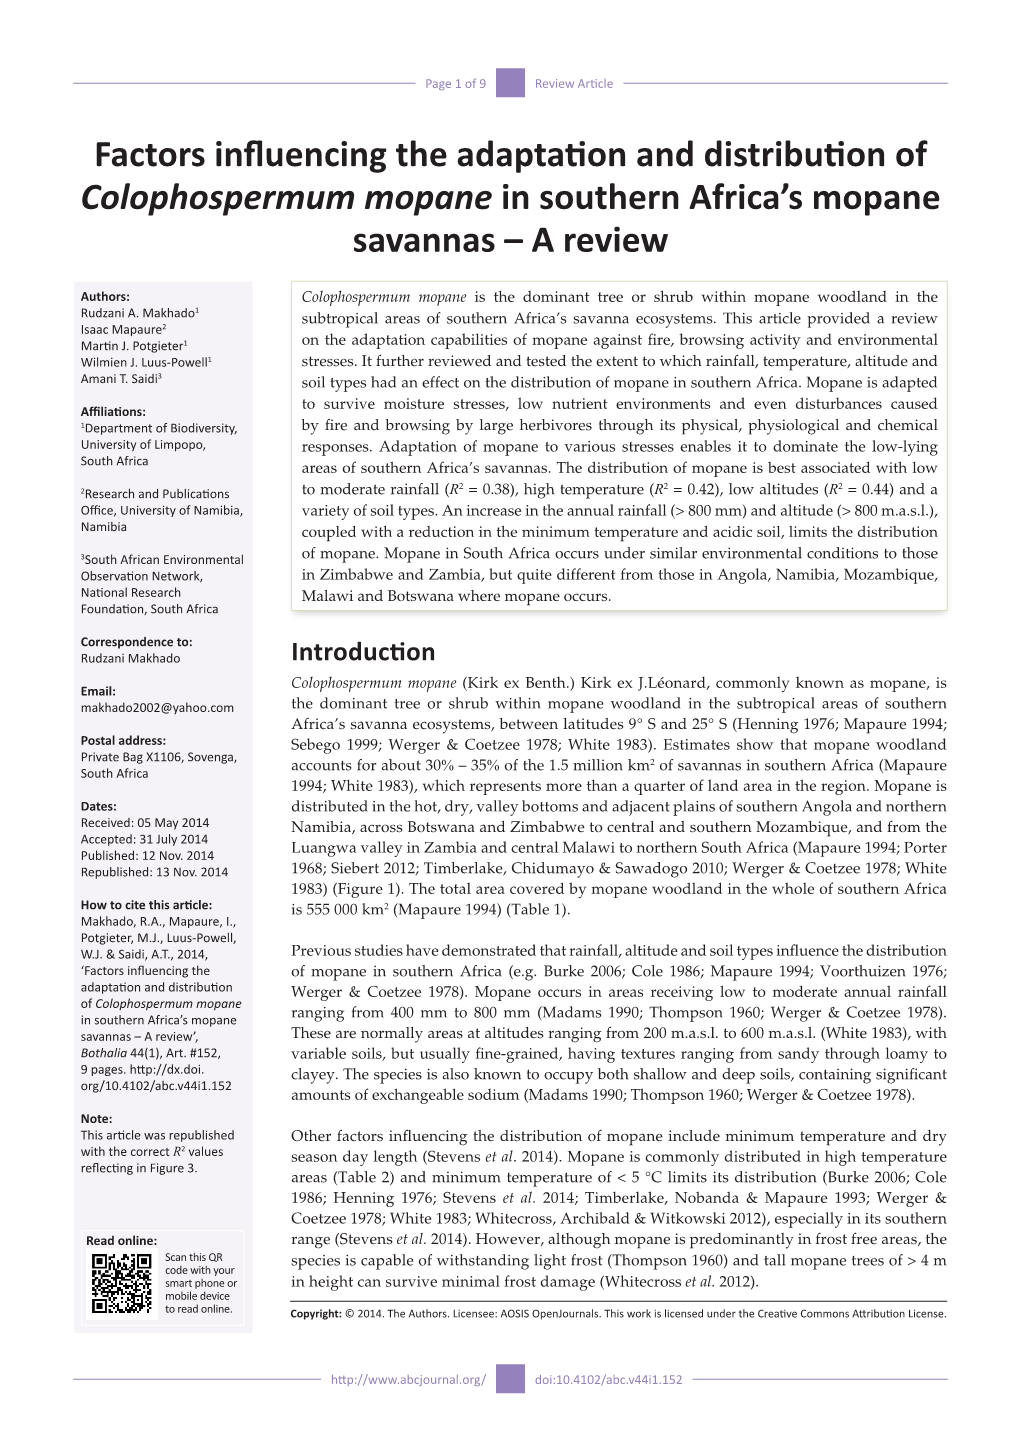 Factors Influencing the Adaptation and Distribution of Colophospermum Mopane in Southern Africa’S Mopane Savannas – a Review